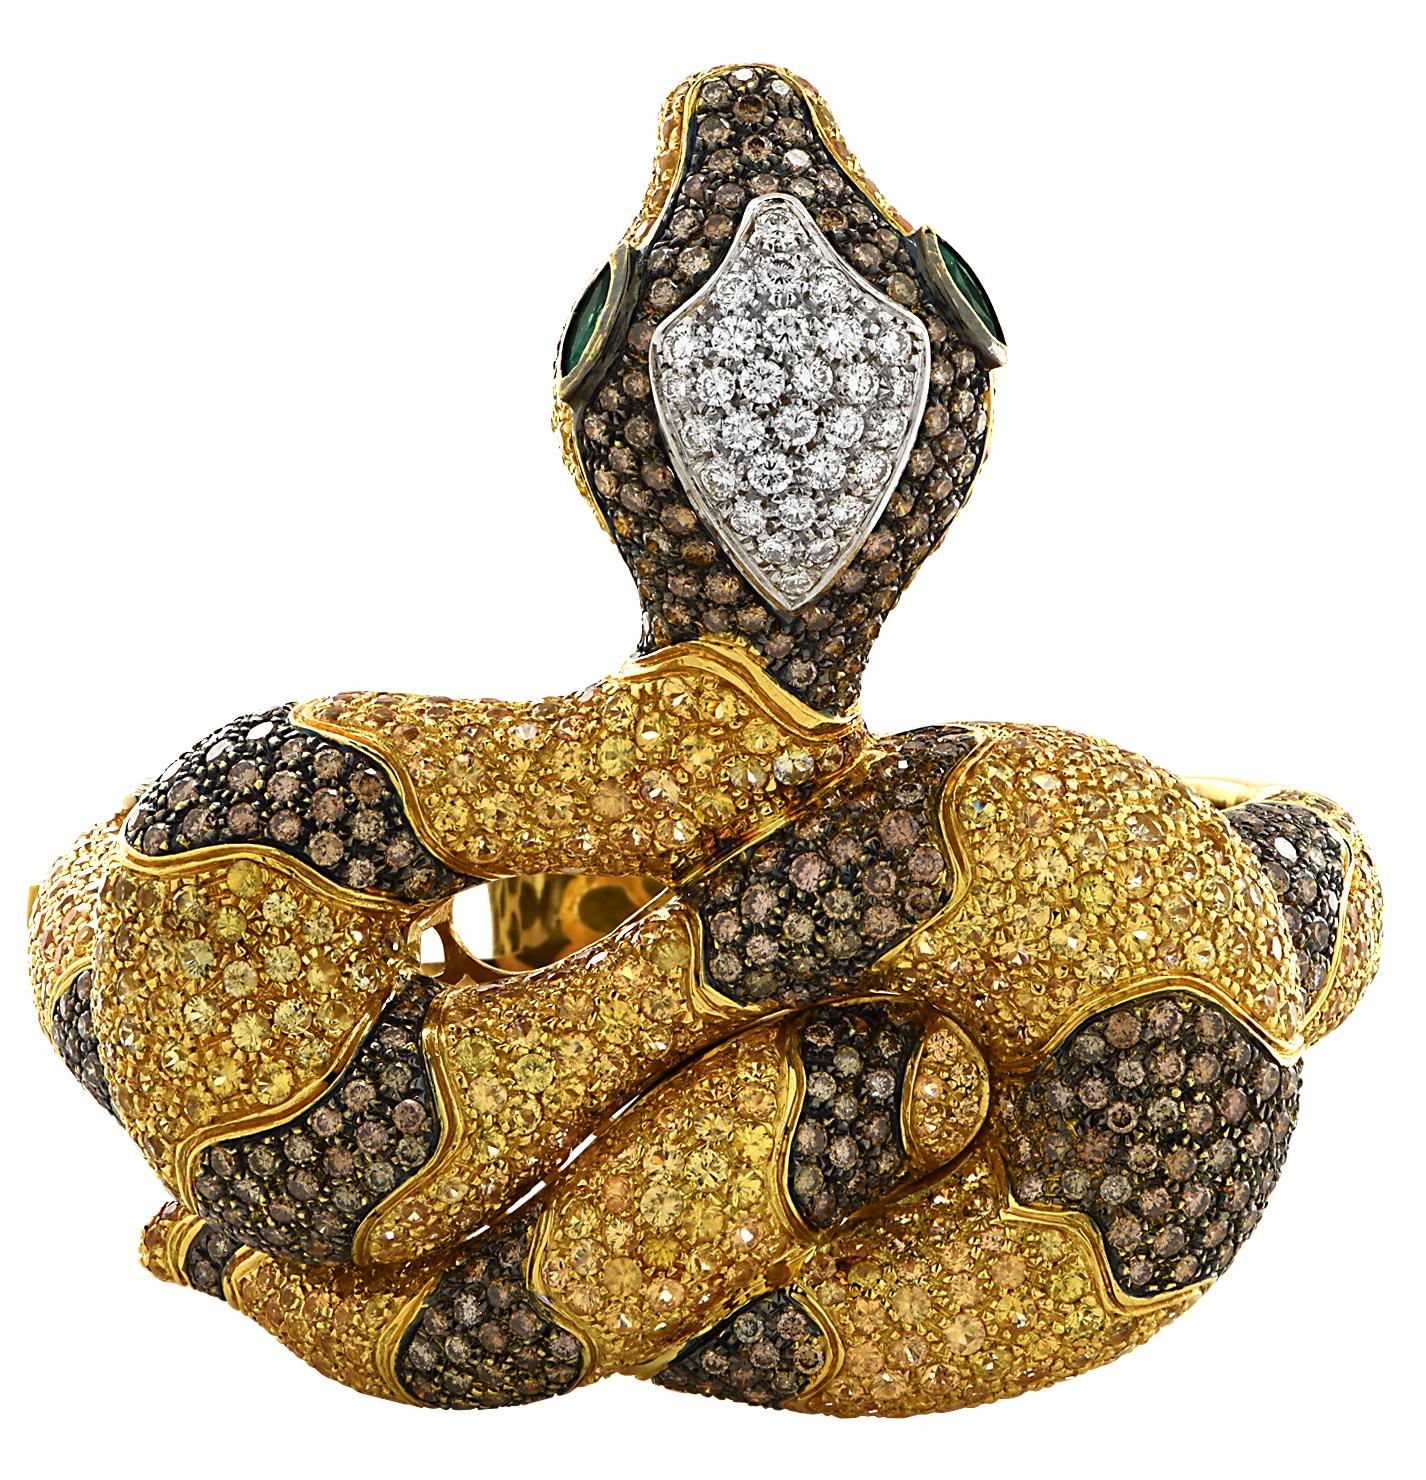 Stunning snake bangle crafted in 18 karat yellow gold, encrusted with 583 yellow sapphires weighing approximately 29.2 carats total, 408 round cut white and brown diamonds weighing approximately 12.6 total and 2 marquise cut emeralds weighing